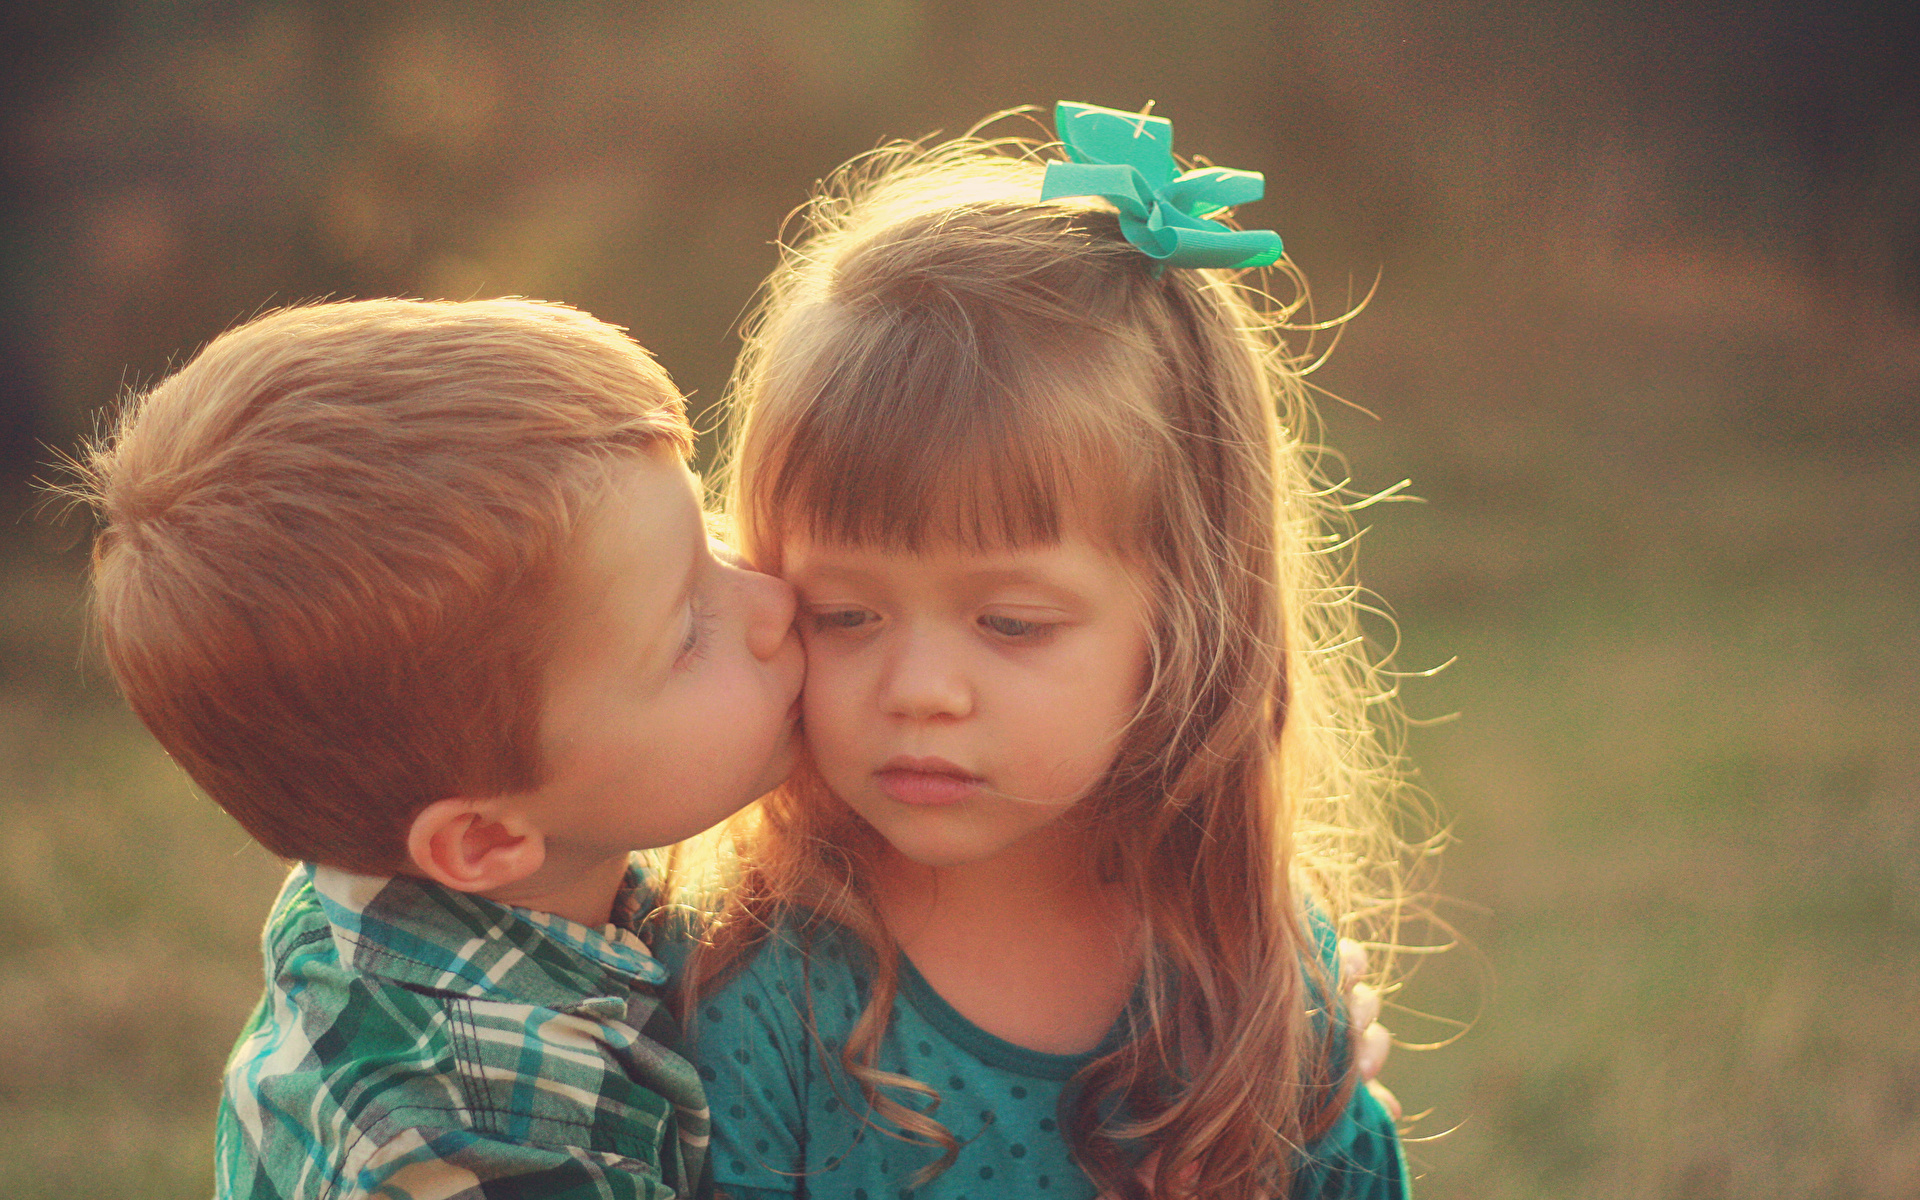 cute baby girl and boy kissing